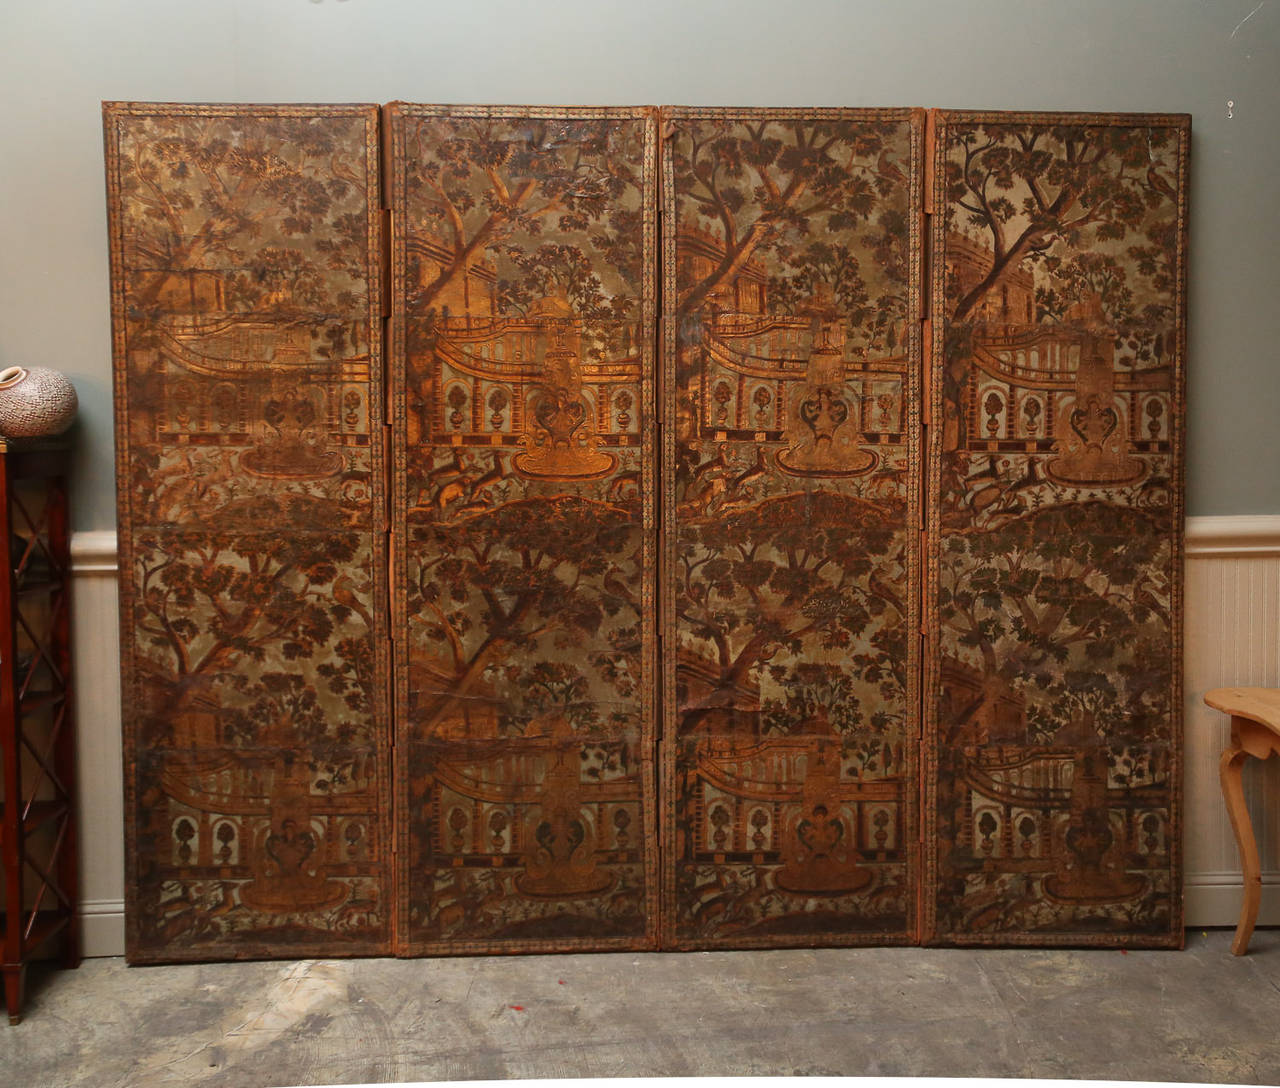 Four-panel embossed screen with Moorish influenced floral and fauna depicted in repetitive design.

Colors are blues greens, and gold colors.

Quite unusual and very handsome.